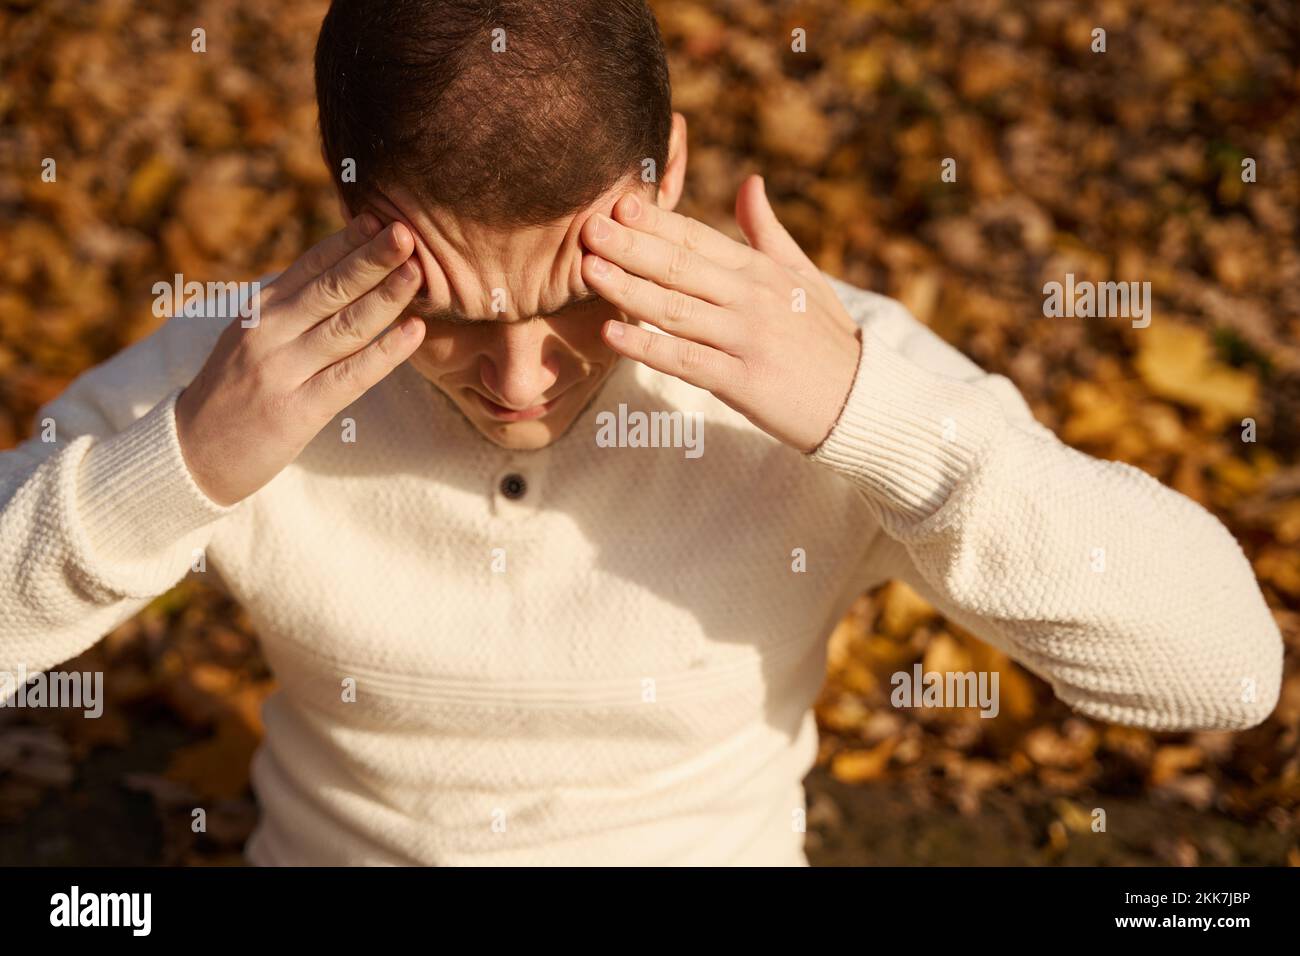 Man is in pain and holding his forehead Stock Photo